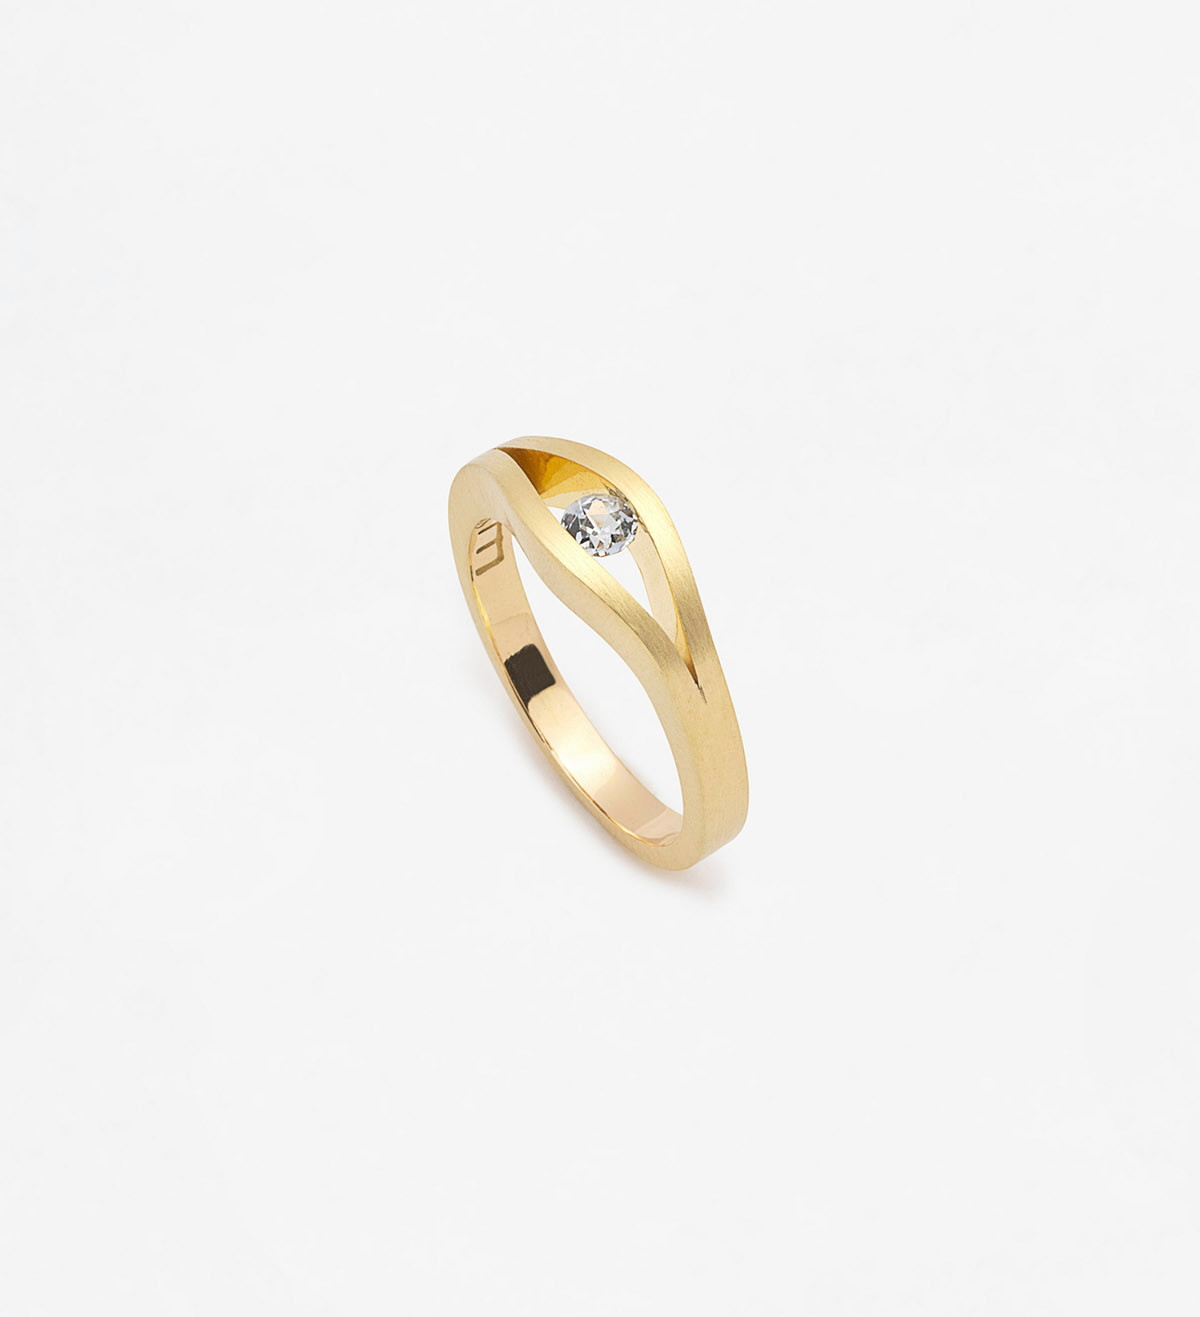 18k gold ring with blue sapphire Wennick-Lefèvre 0.21ct